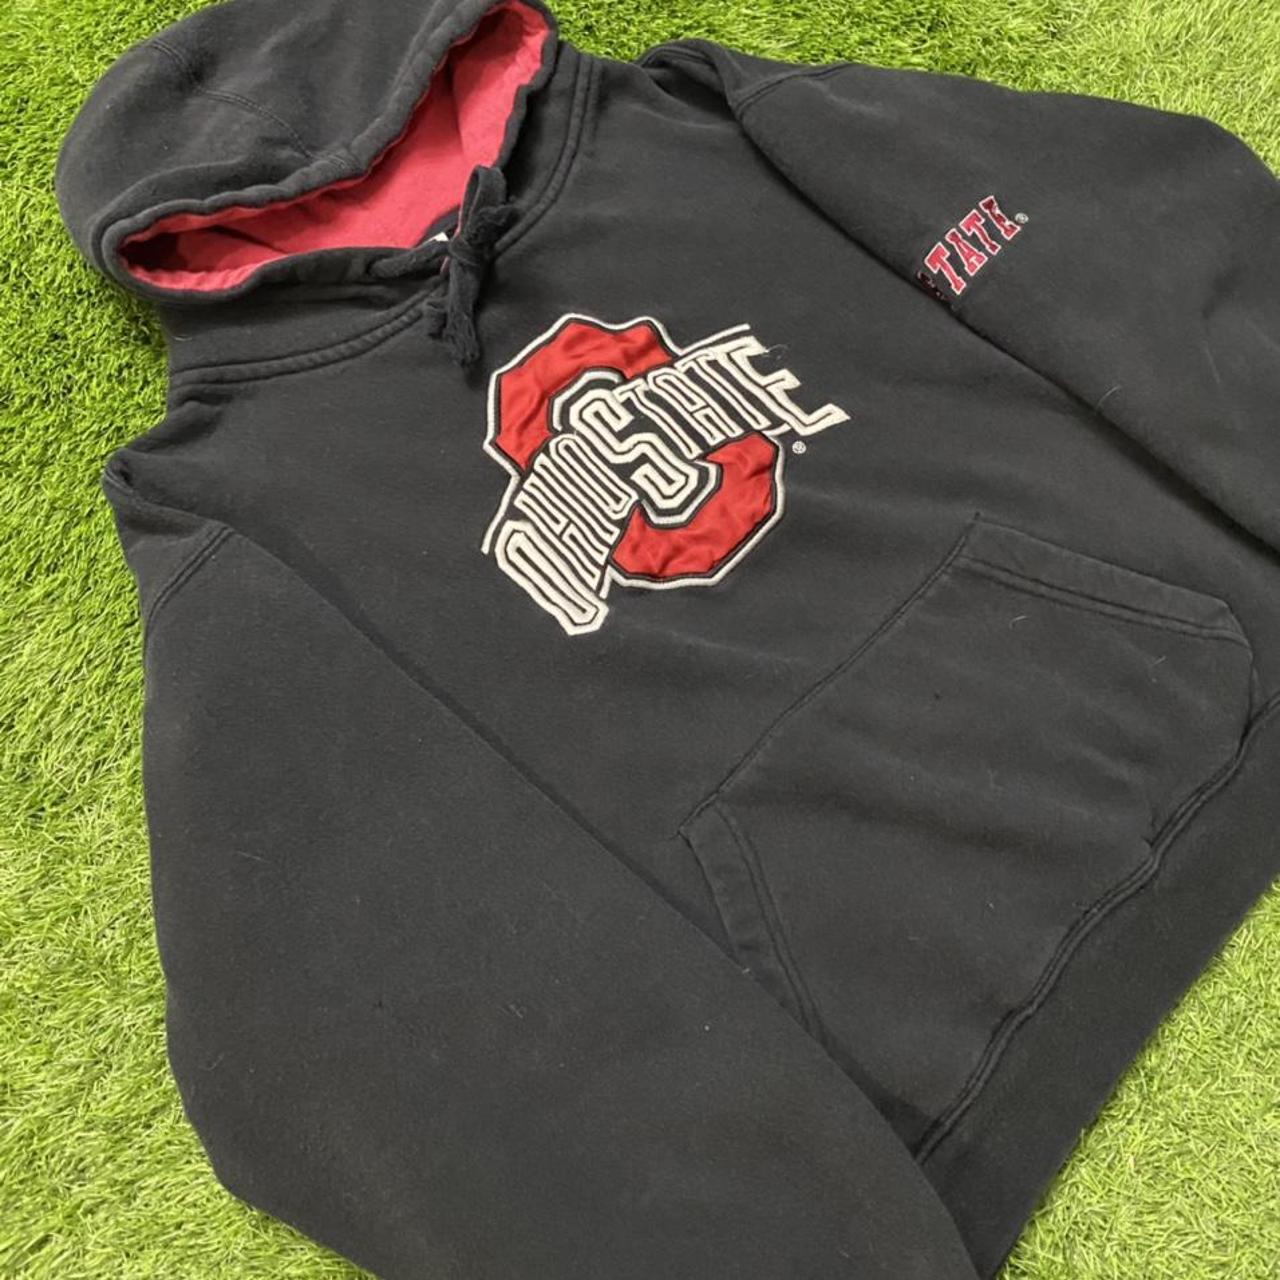 Product Image 2 - Ohio State University Hoodie!
Condition: Refer